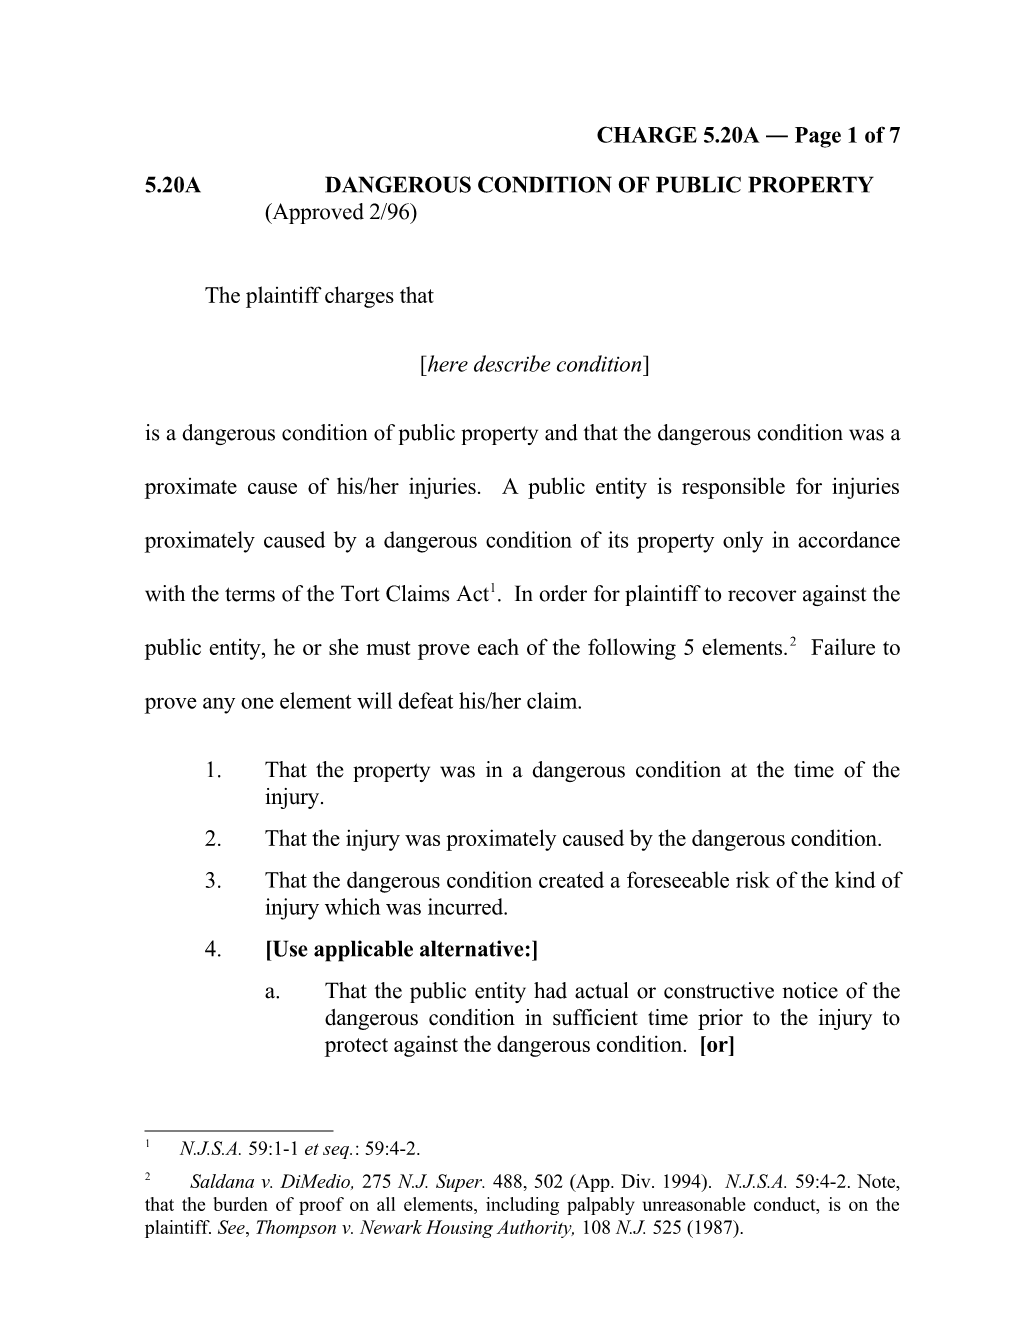 5.20A DANGEROUS CONDITION of PUBLIC PROPERTY (Approved 2/96)